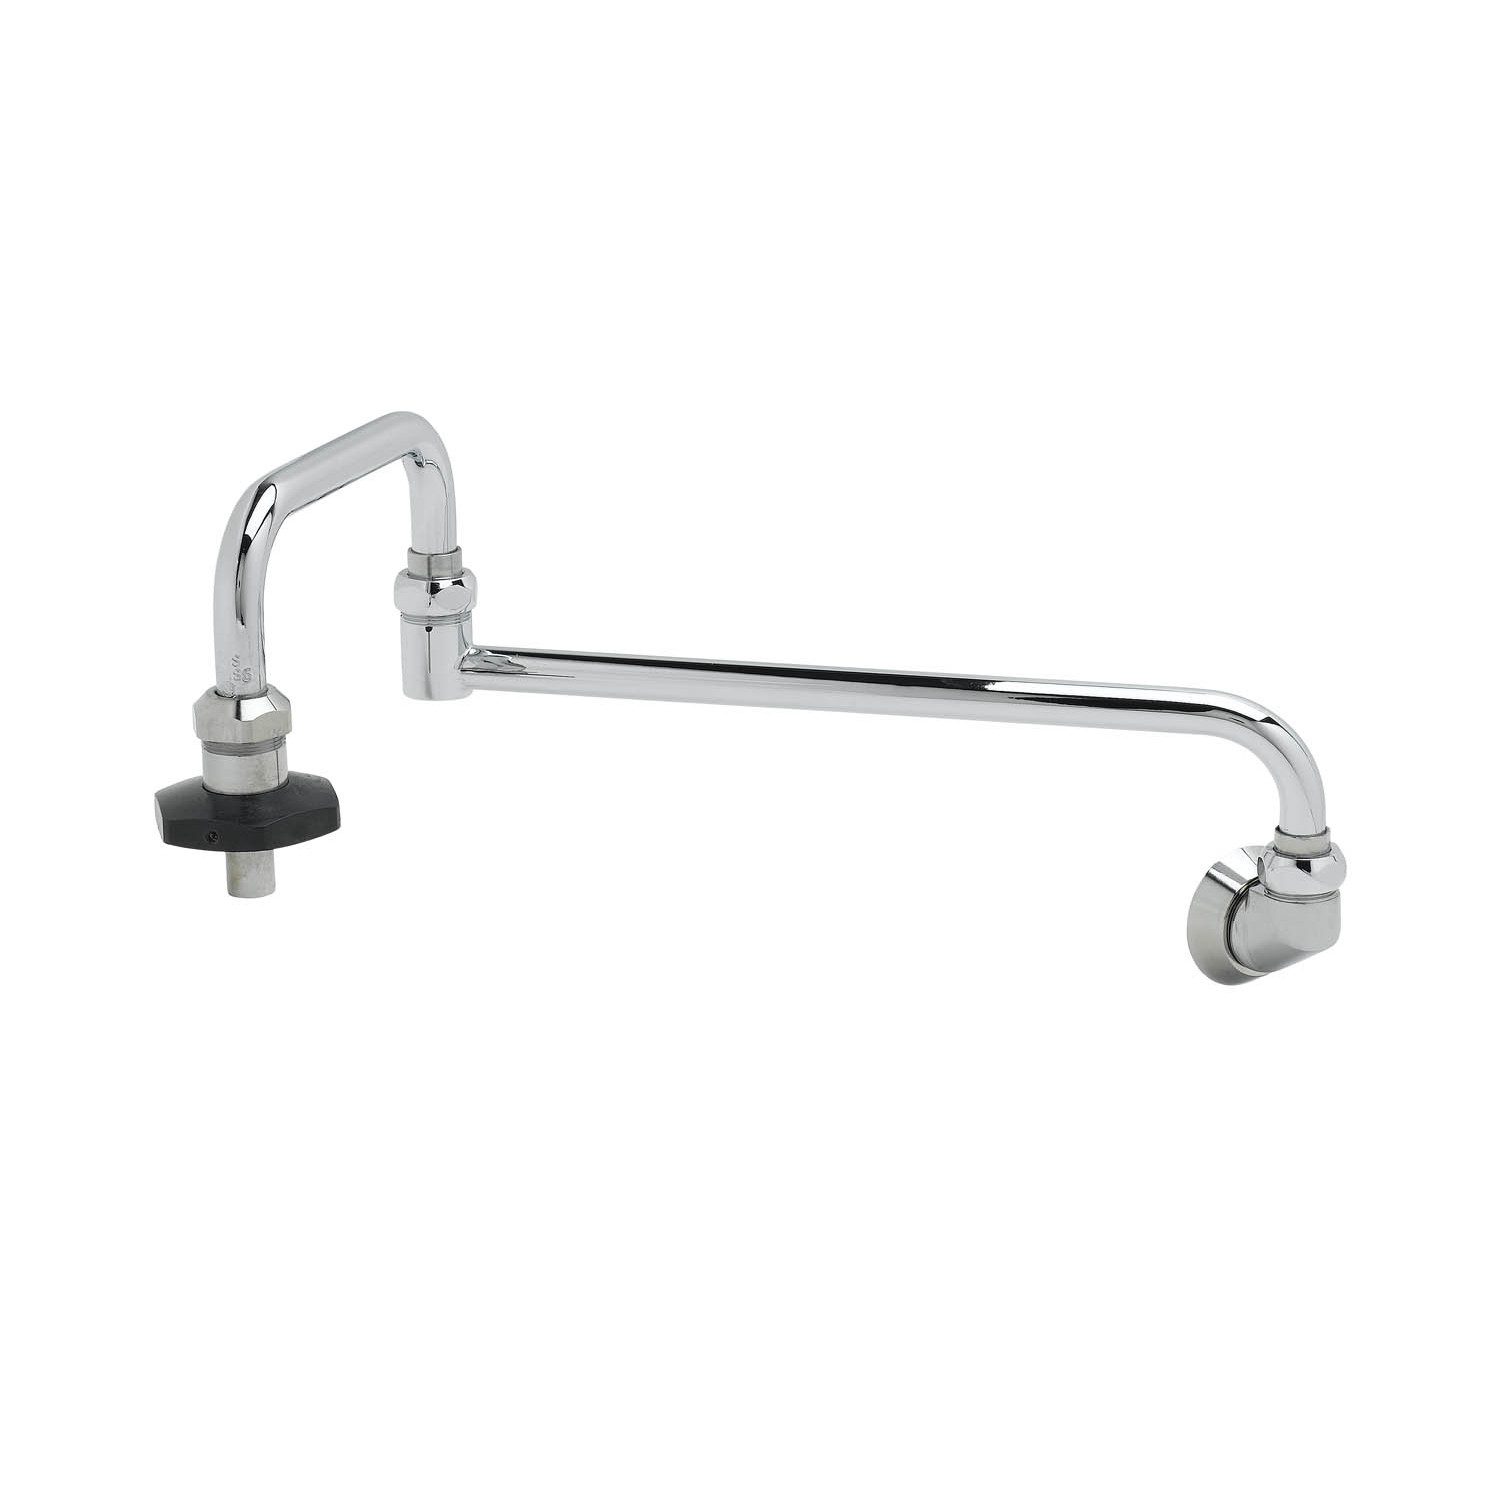 T&S Pot Filler Wall Mount with 18" Double Joint Nozzle: B-580